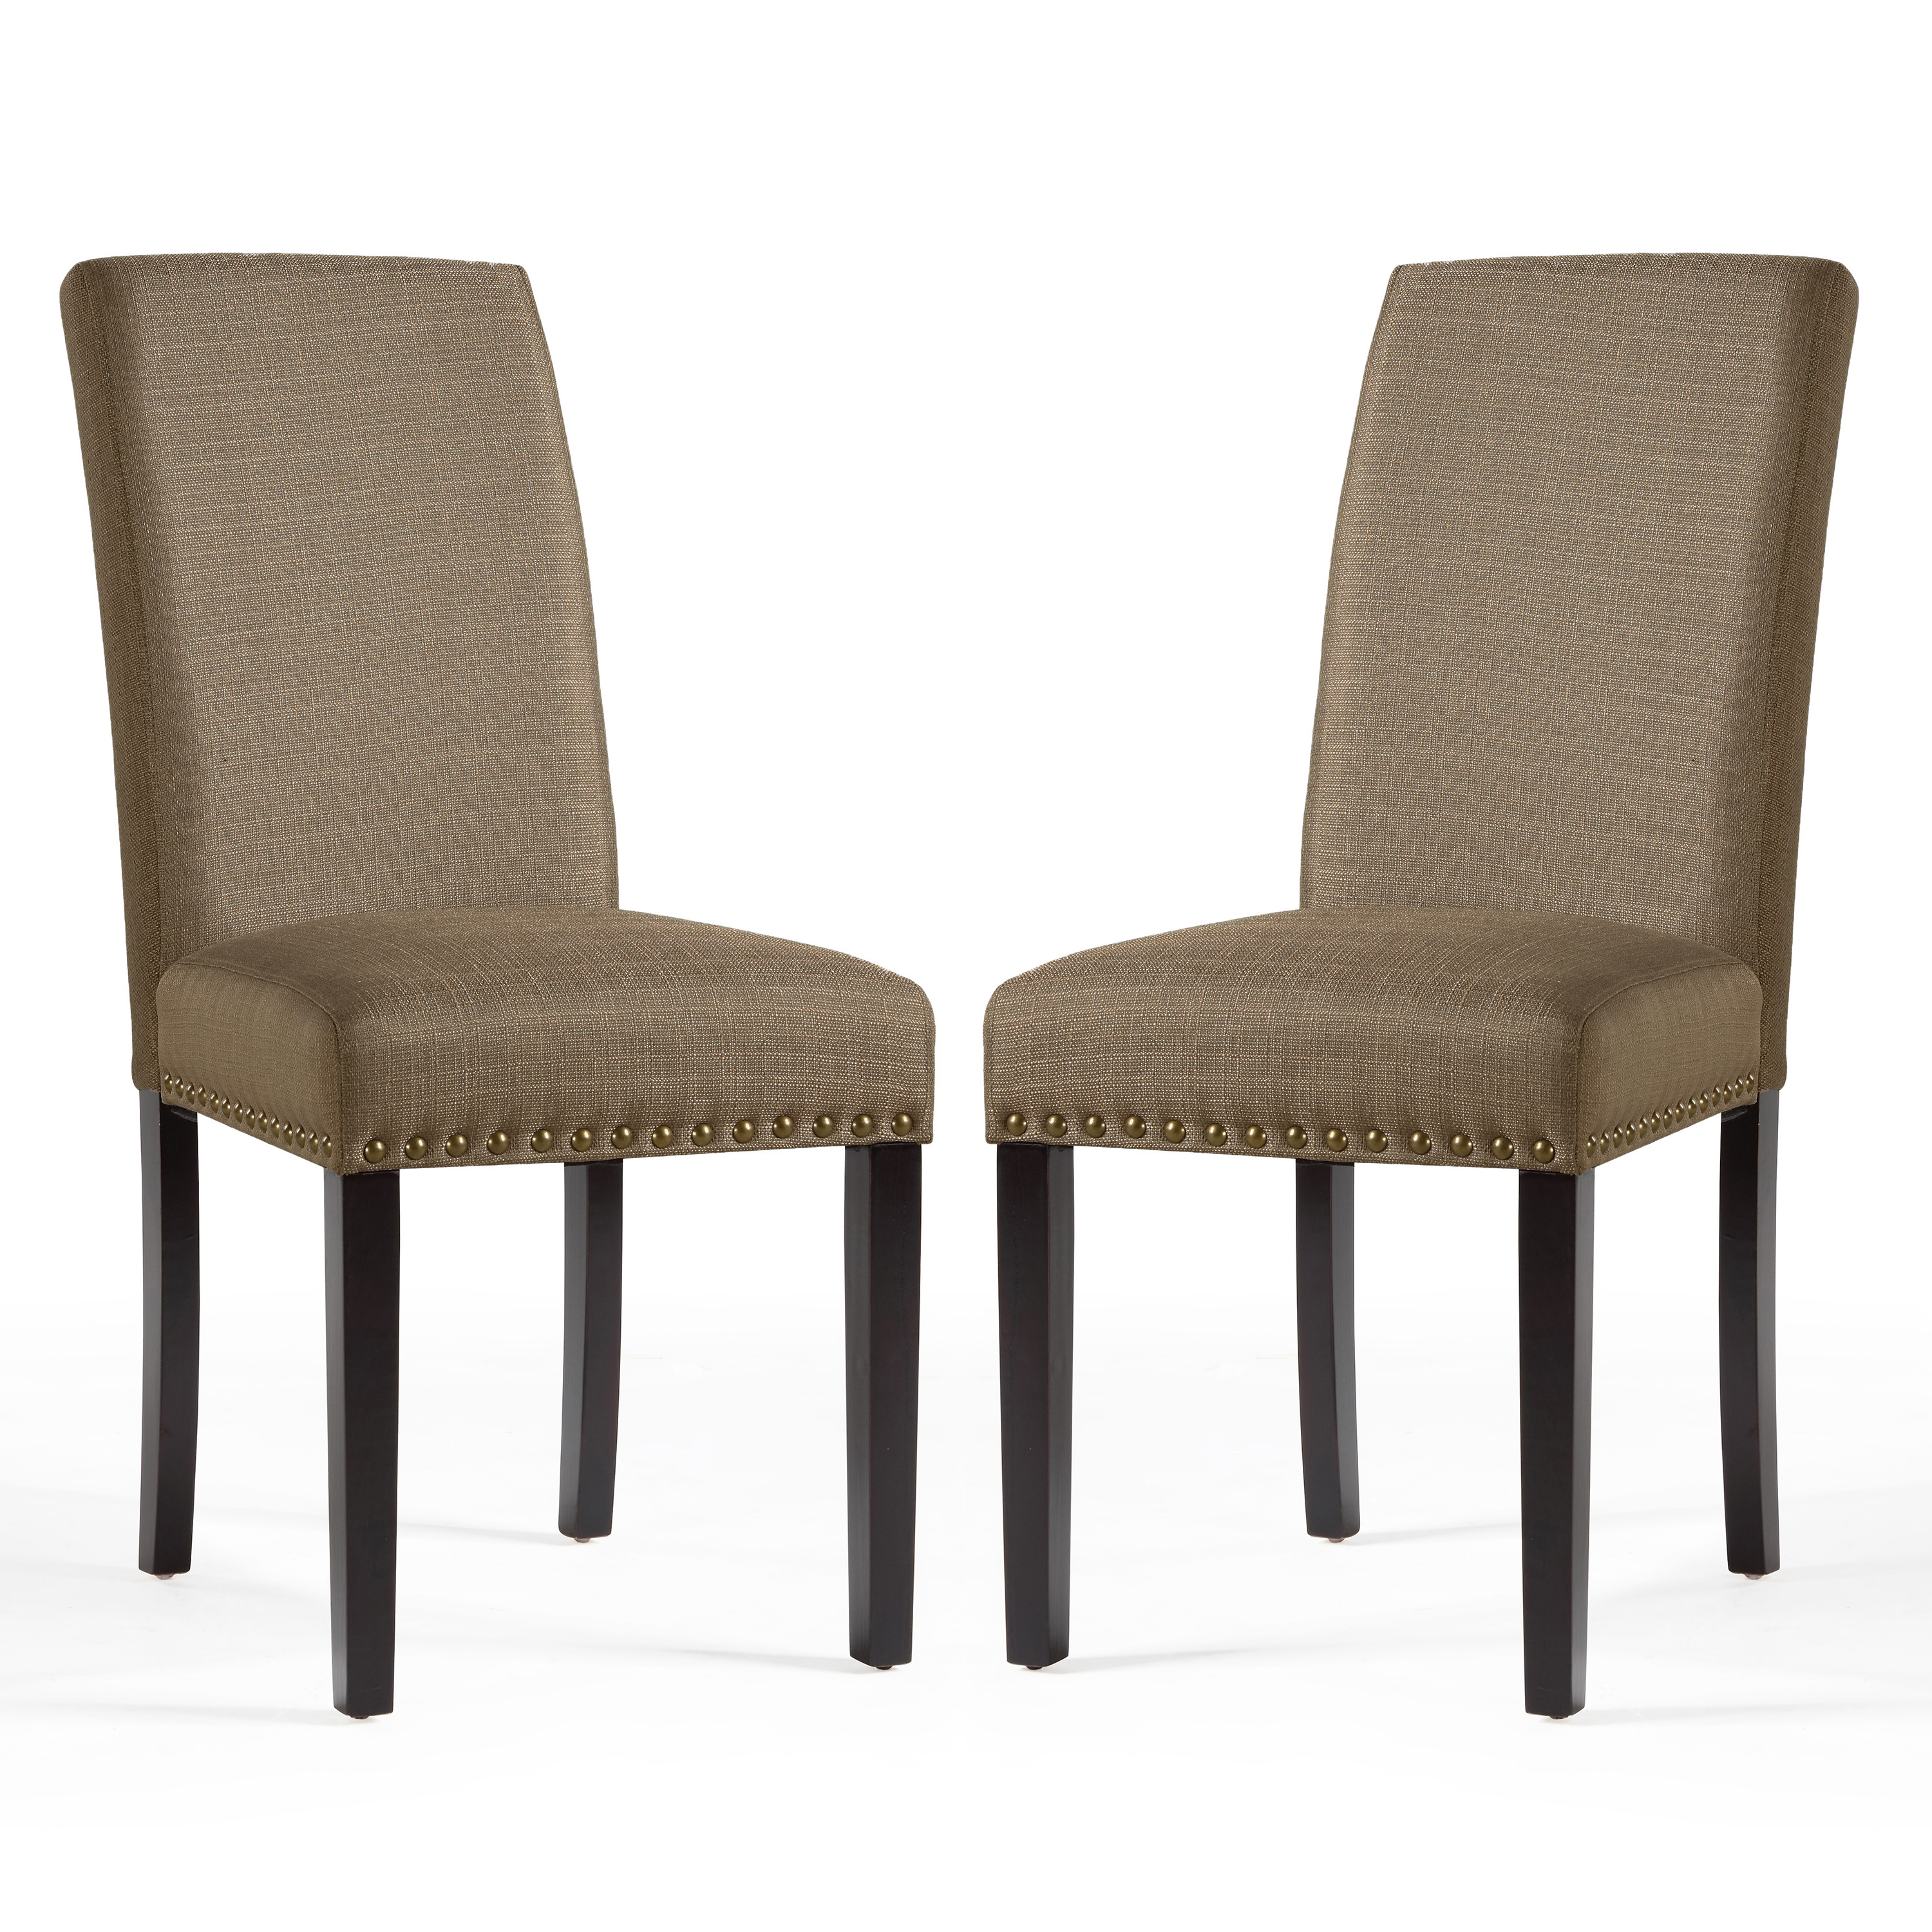 DHI Nice Nail Head Upholstered Dining Chair, 2 Pack, Multiple Colors - image 1 of 7